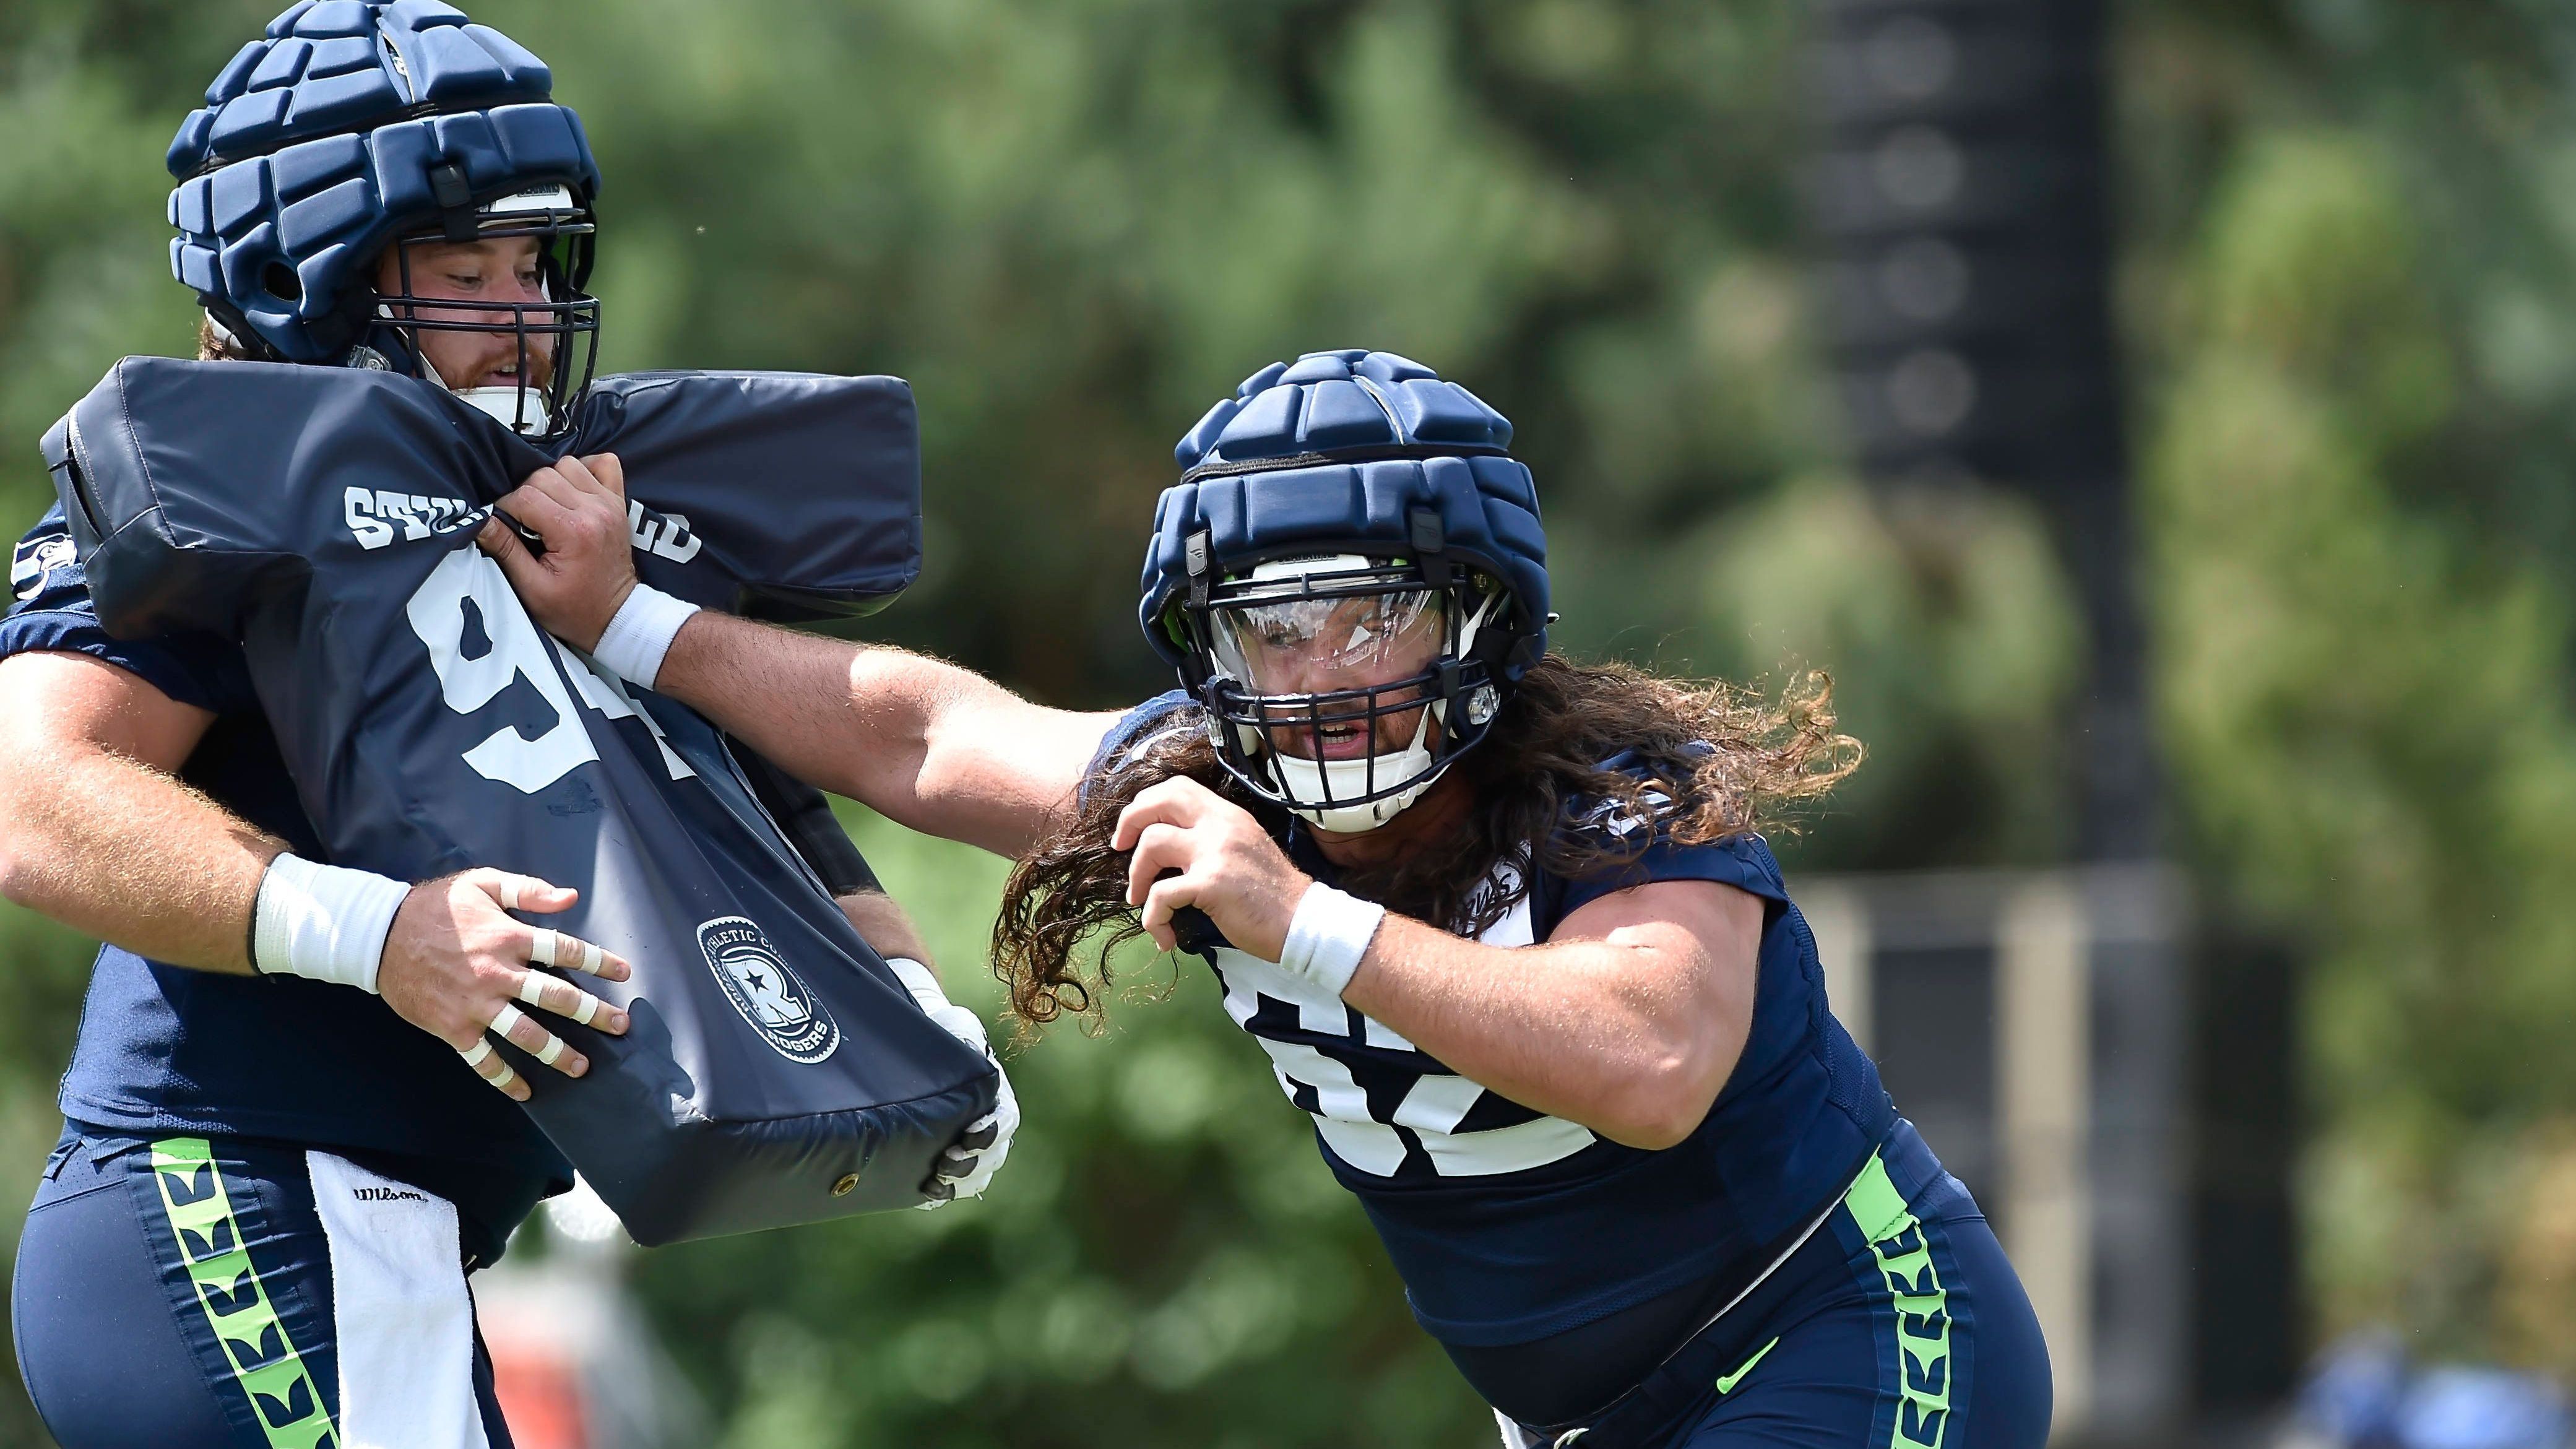 <strong>Seattle Seahawks</strong><br>Volontary Minicamp: 22. - 24. April<br>OTA Offseason Workouts: 20. Mai, 22./23. Mai, 28. Mai, 30./31. Mai, 3./4. Juni, 6./7. Juni<br>Mandatory Minicamp: 11. - 13. Juni